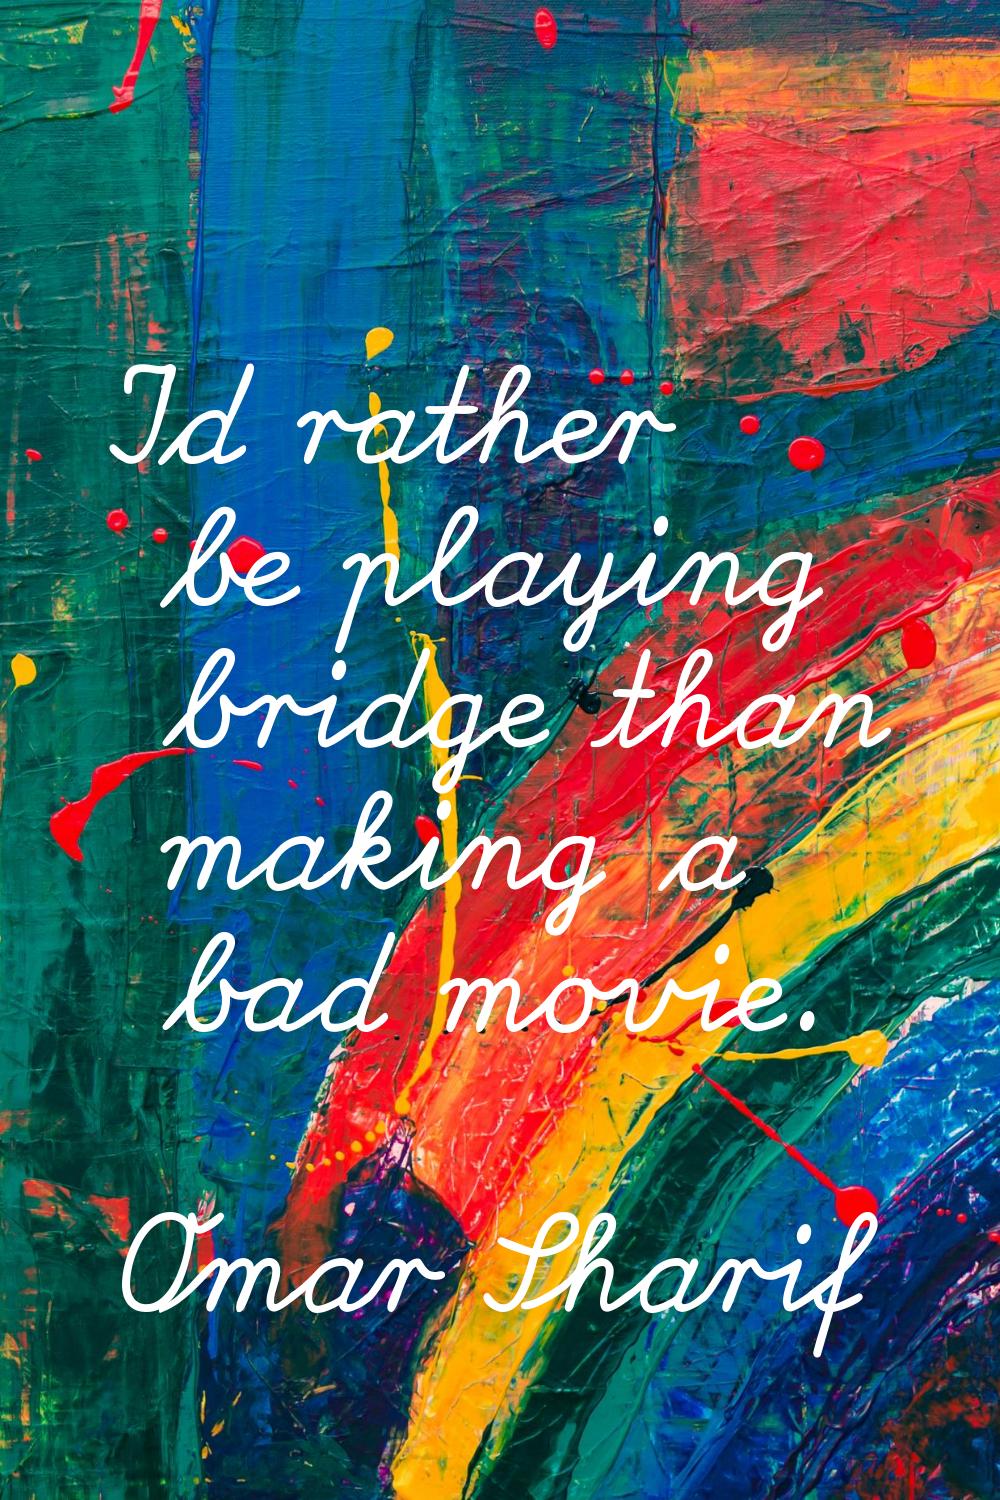 I'd rather be playing bridge than making a bad movie.